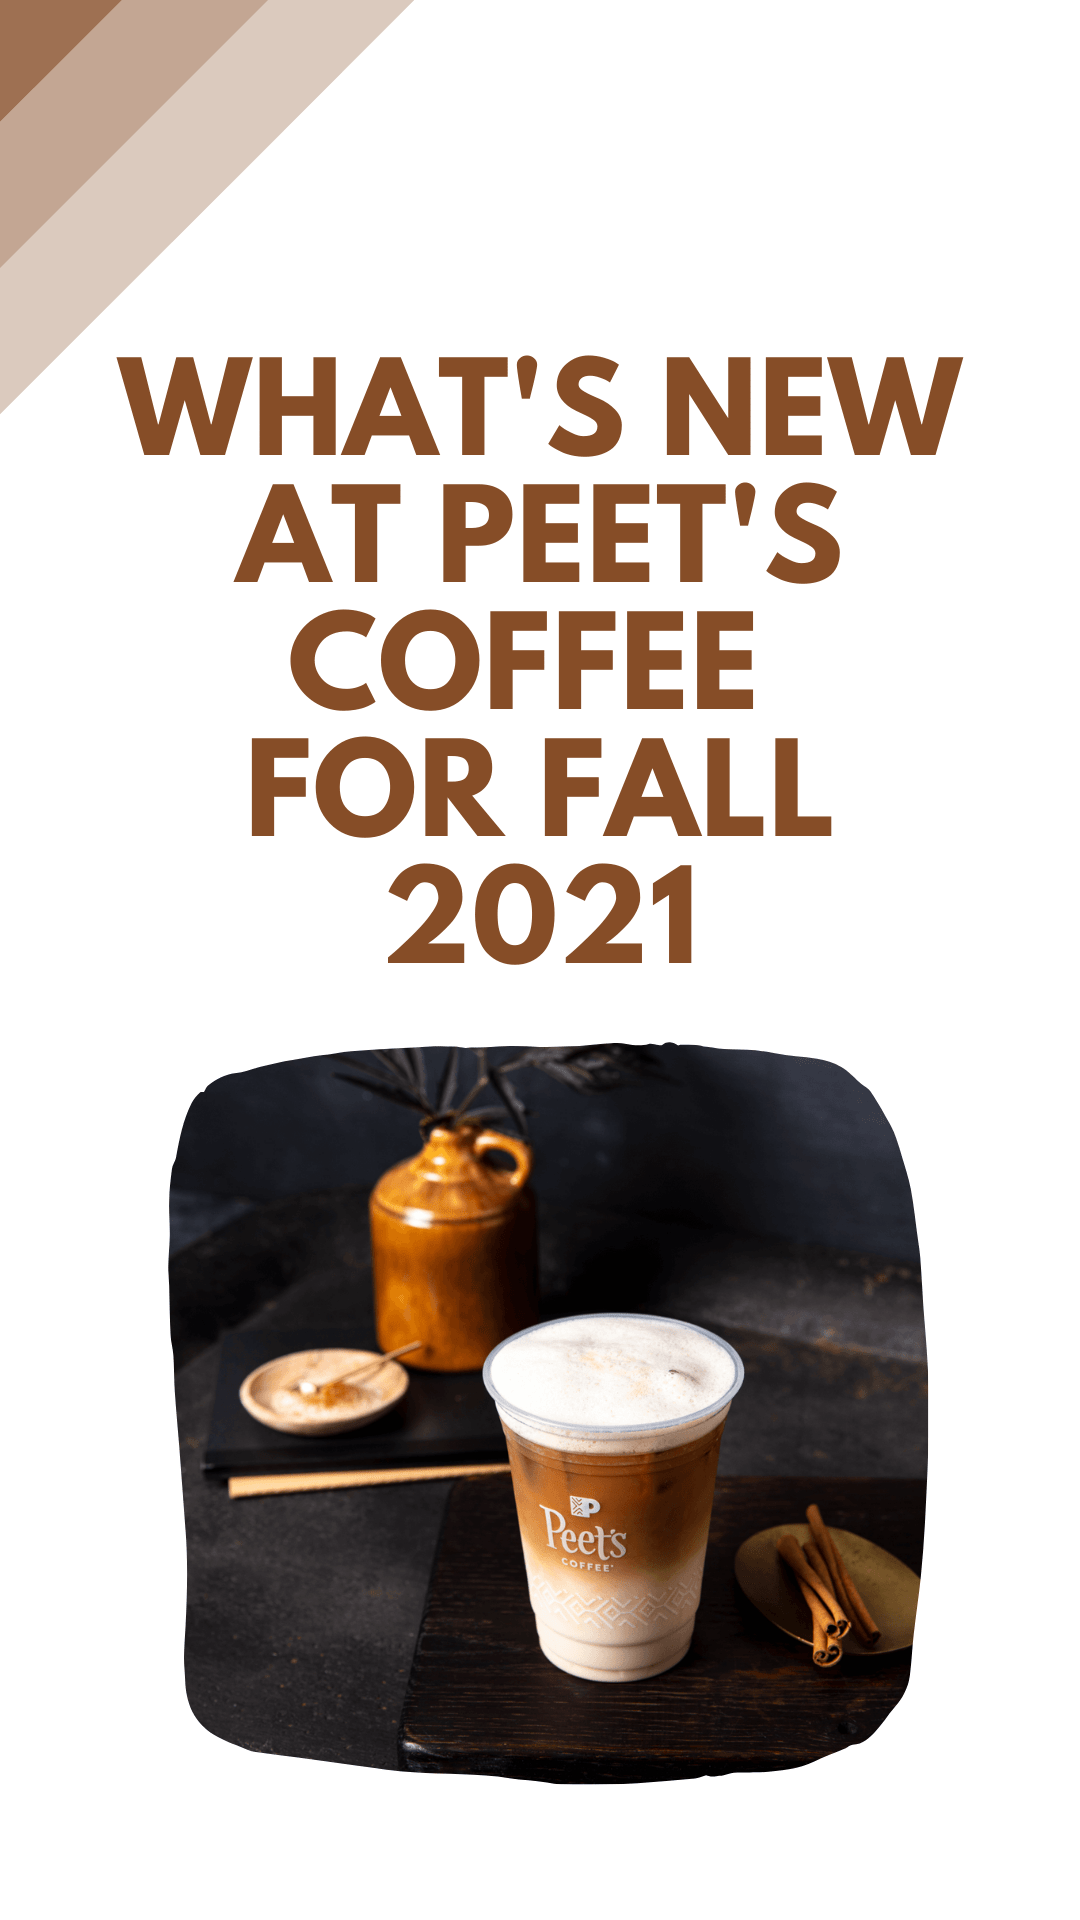 What's new at Peet's Coffee for fall 2021